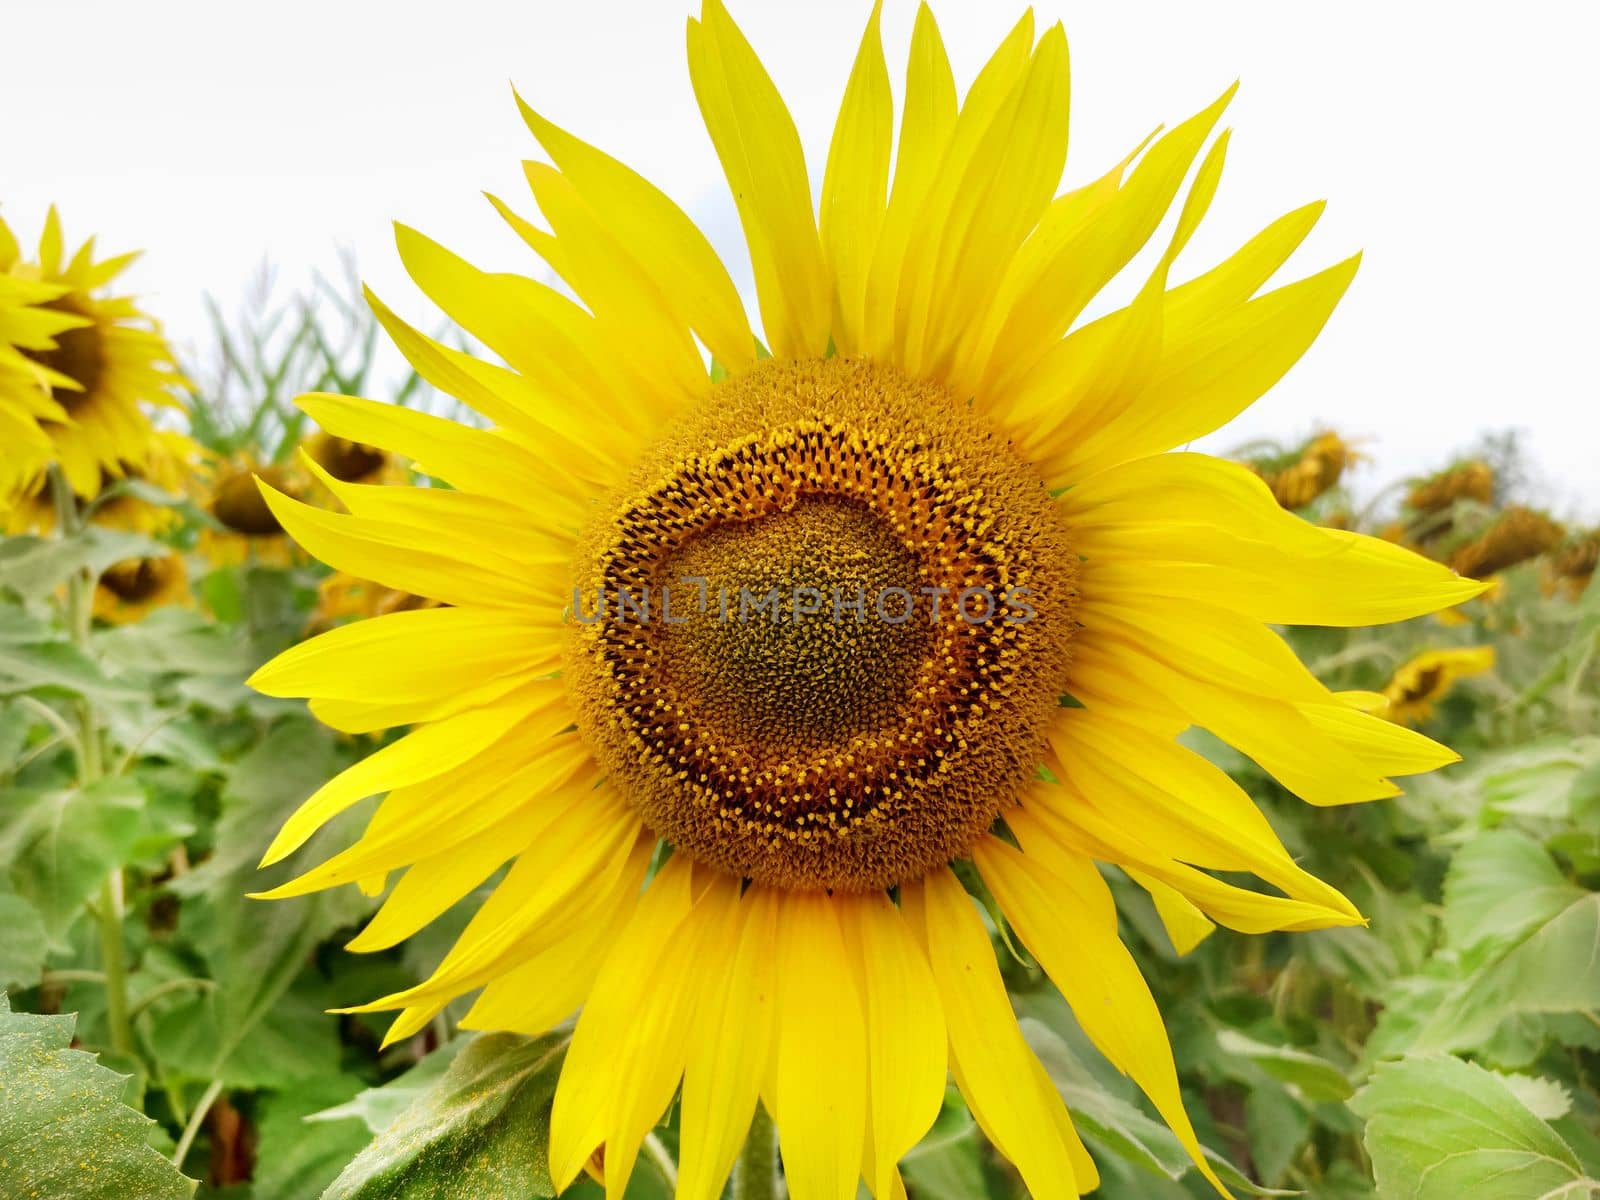 In the foreground on a cloudy day, a yellow sunflower by Mastak80